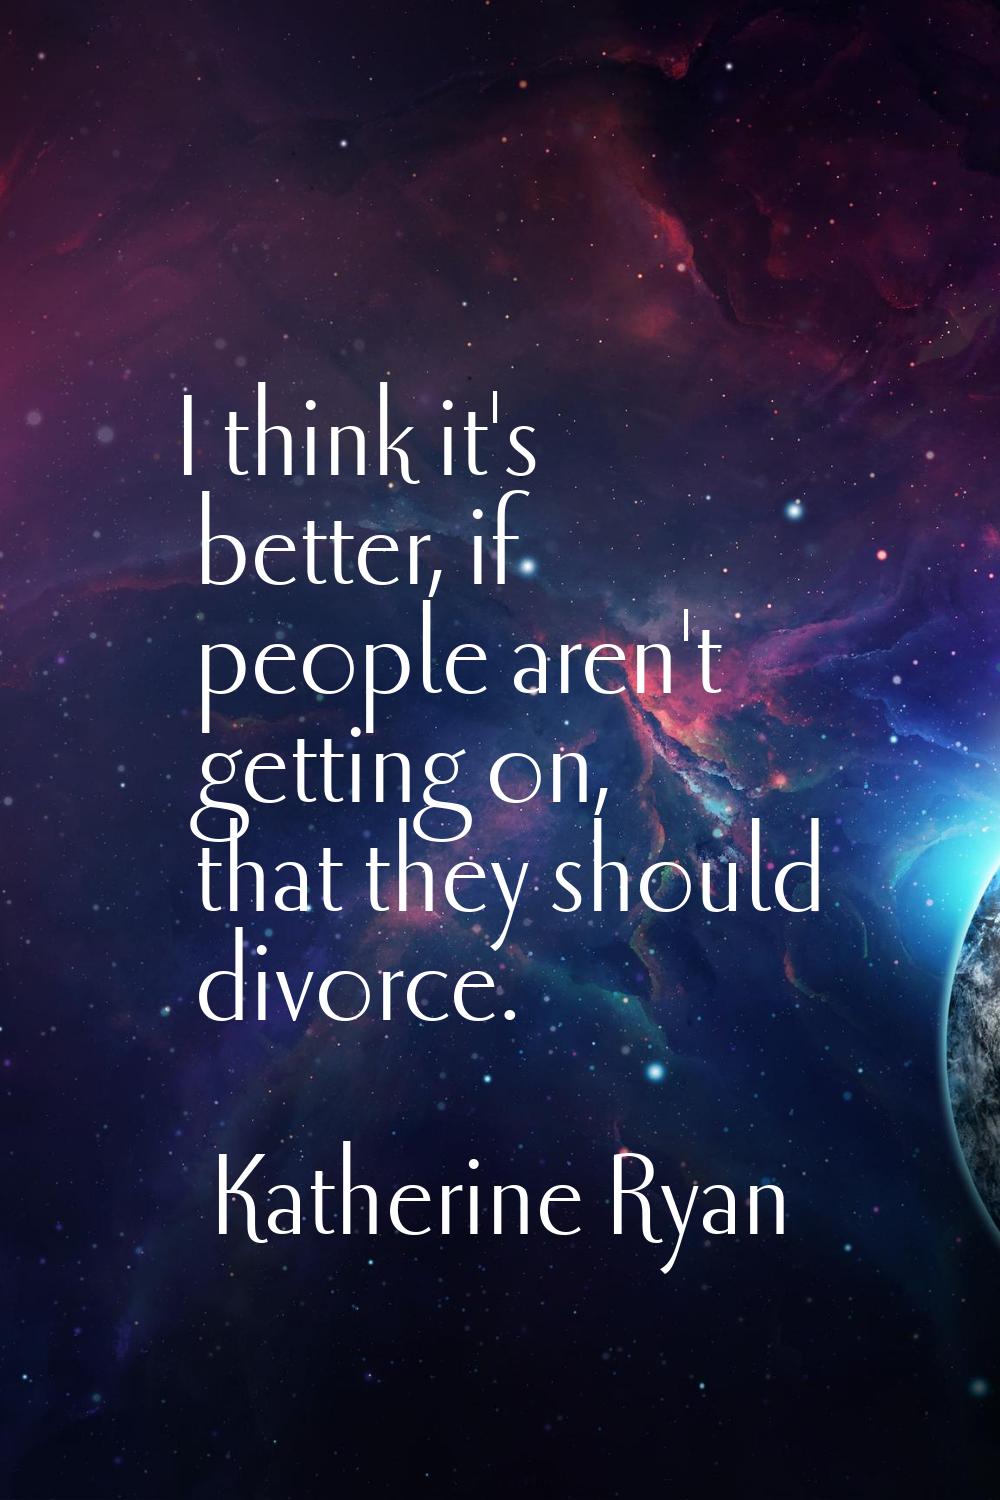 I think it's better, if people aren't getting on, that they should divorce.